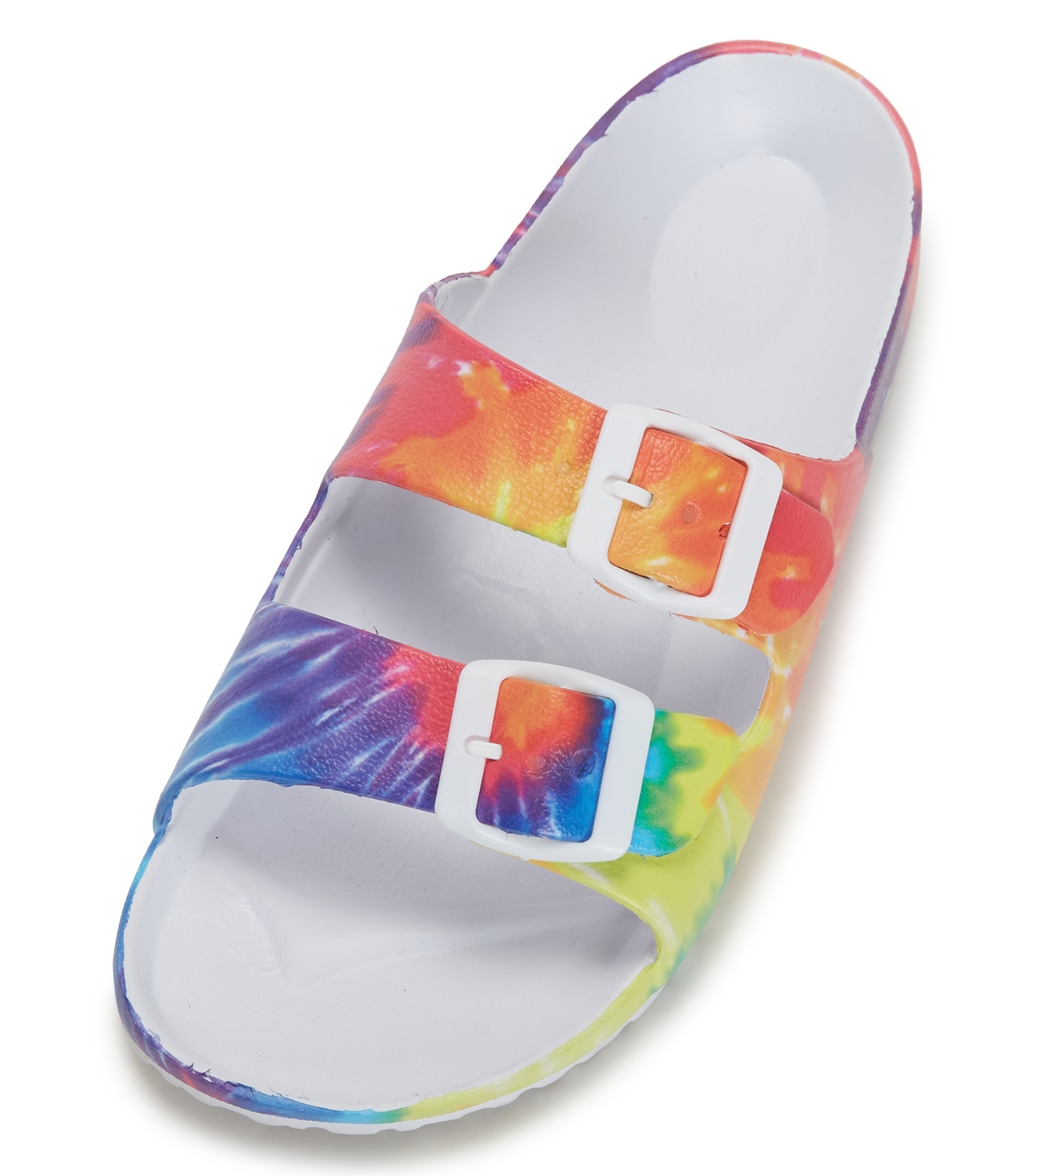 Northside Girl's Tate Slip On Shoes Shoes Sandals - Multi 12 - Swimoutlet.com